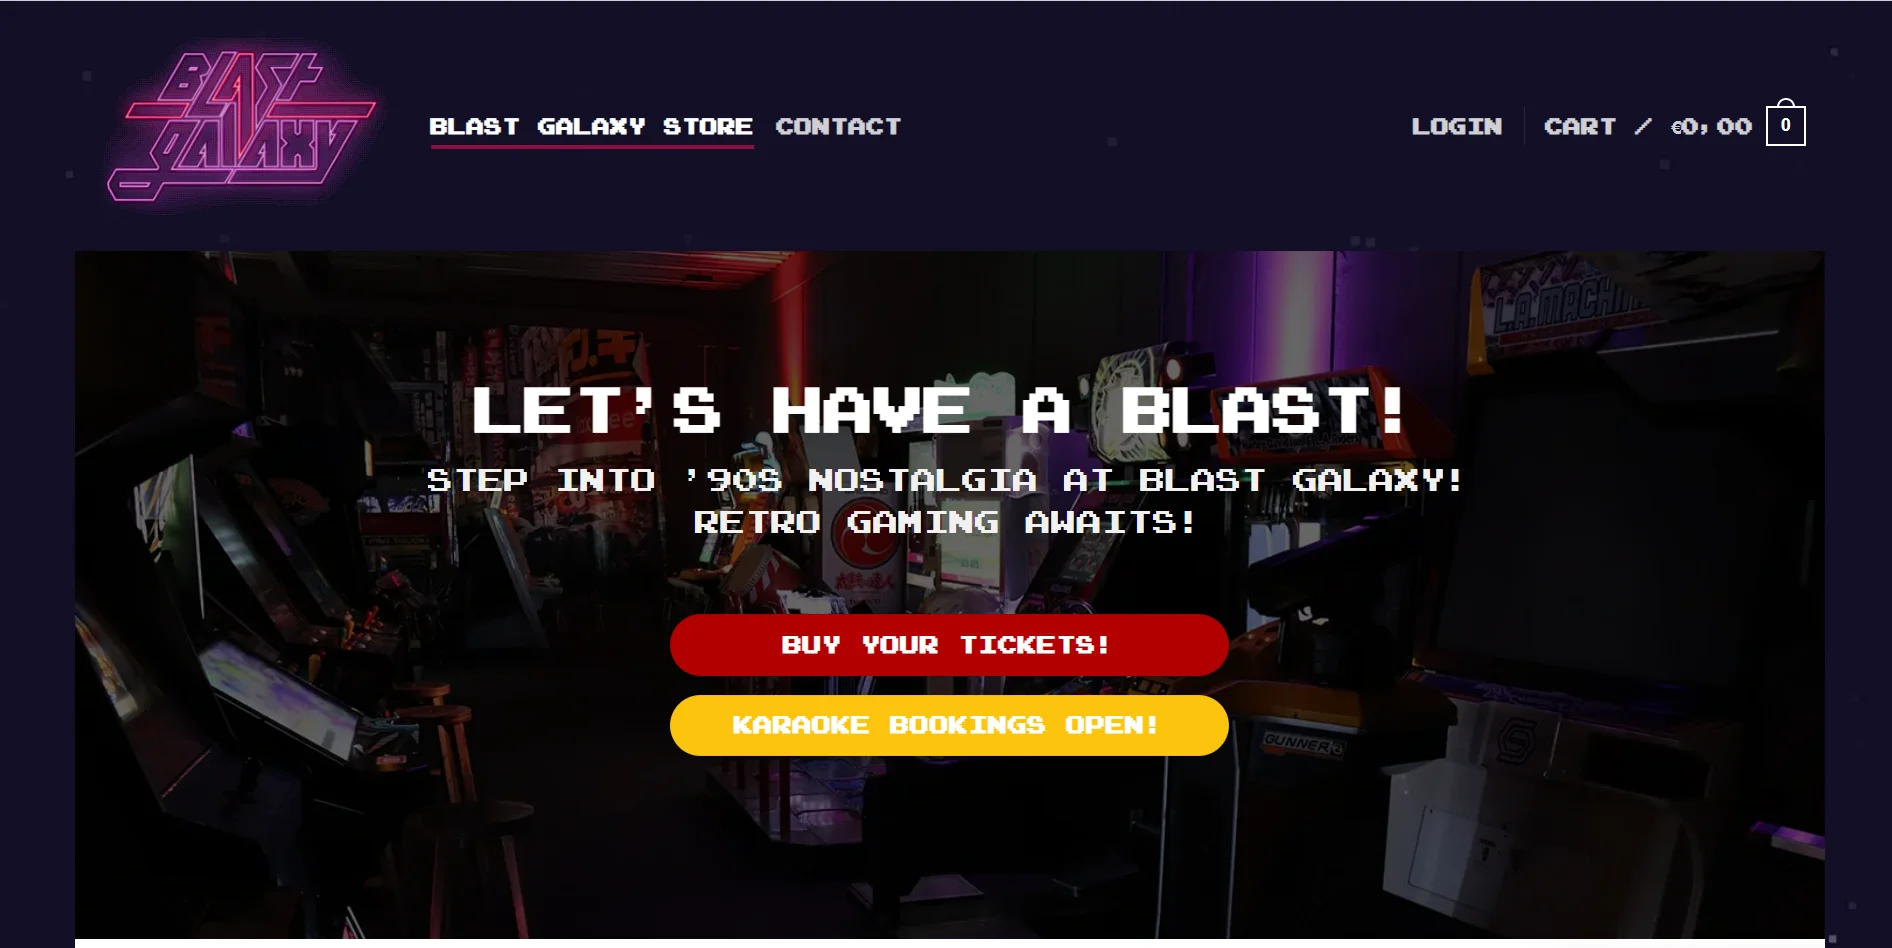 A screenshot of the arcade "blast galaxy" website that shows how to use font effectively on retro websites.